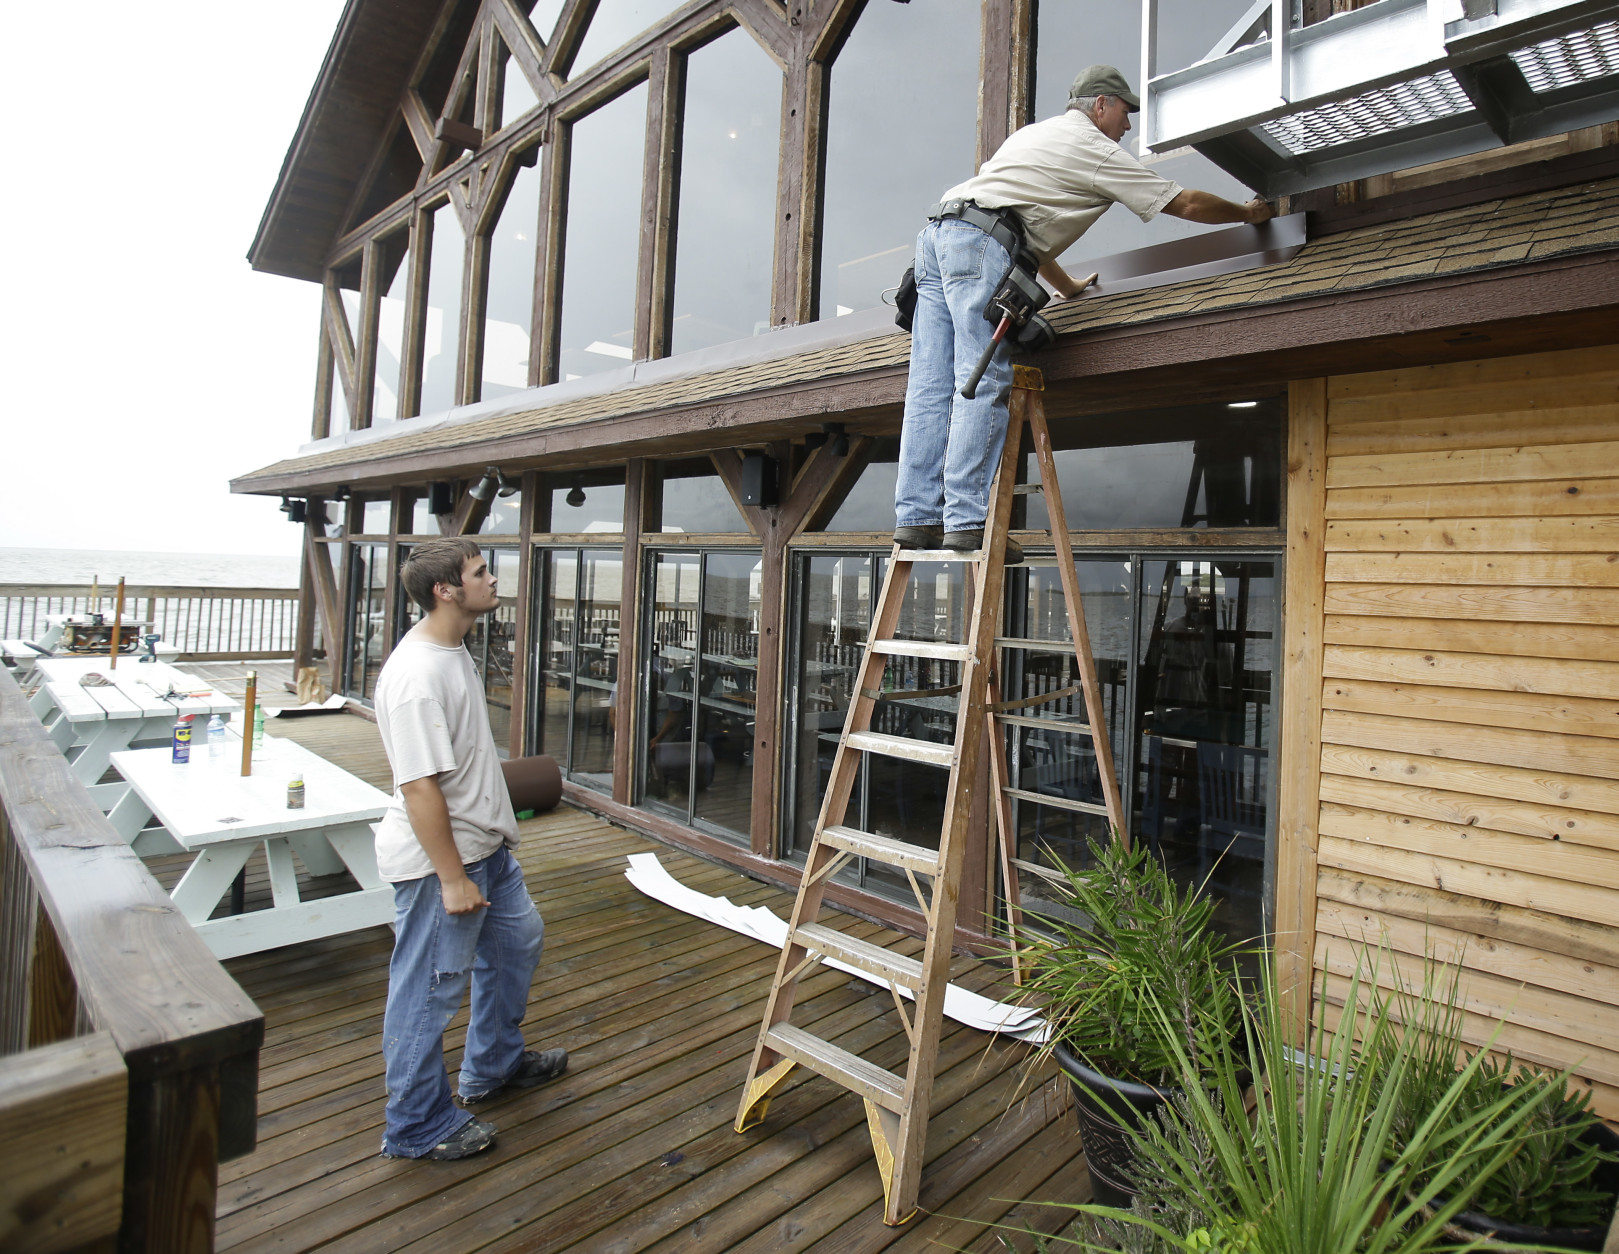 Workers install flashing around the roof and windows of restaurant in preparation of Tropical Storm Hermine Wednesday, Aug. 31, 2016, in Cedar Key, Fla. Forecasters say Hermine could be near hurricane strength by Thursday night as it approaches the Gulf Coast. (AP Photo/John Raoux)